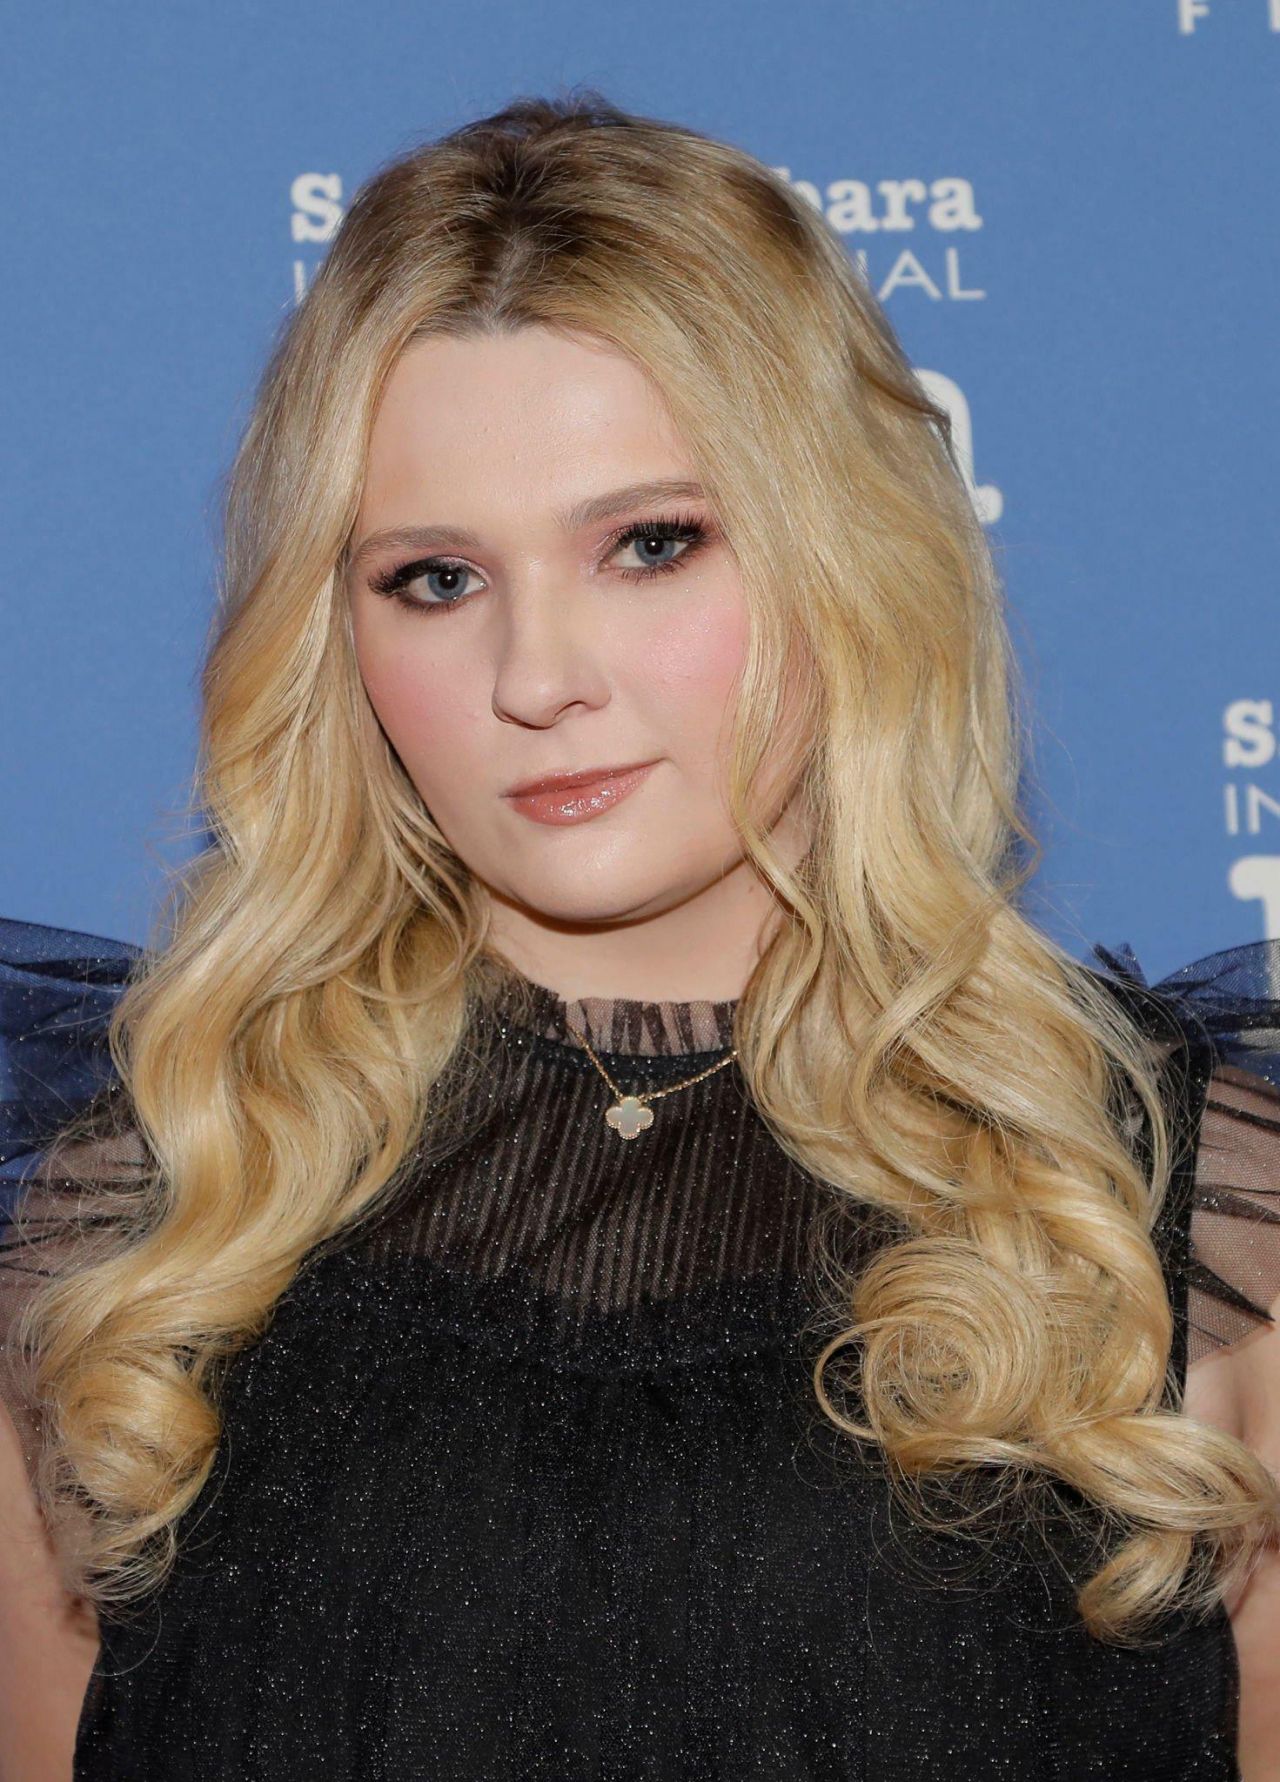 Abigail Breslin Style Clothes Outfits And Fashion • Celebmafia